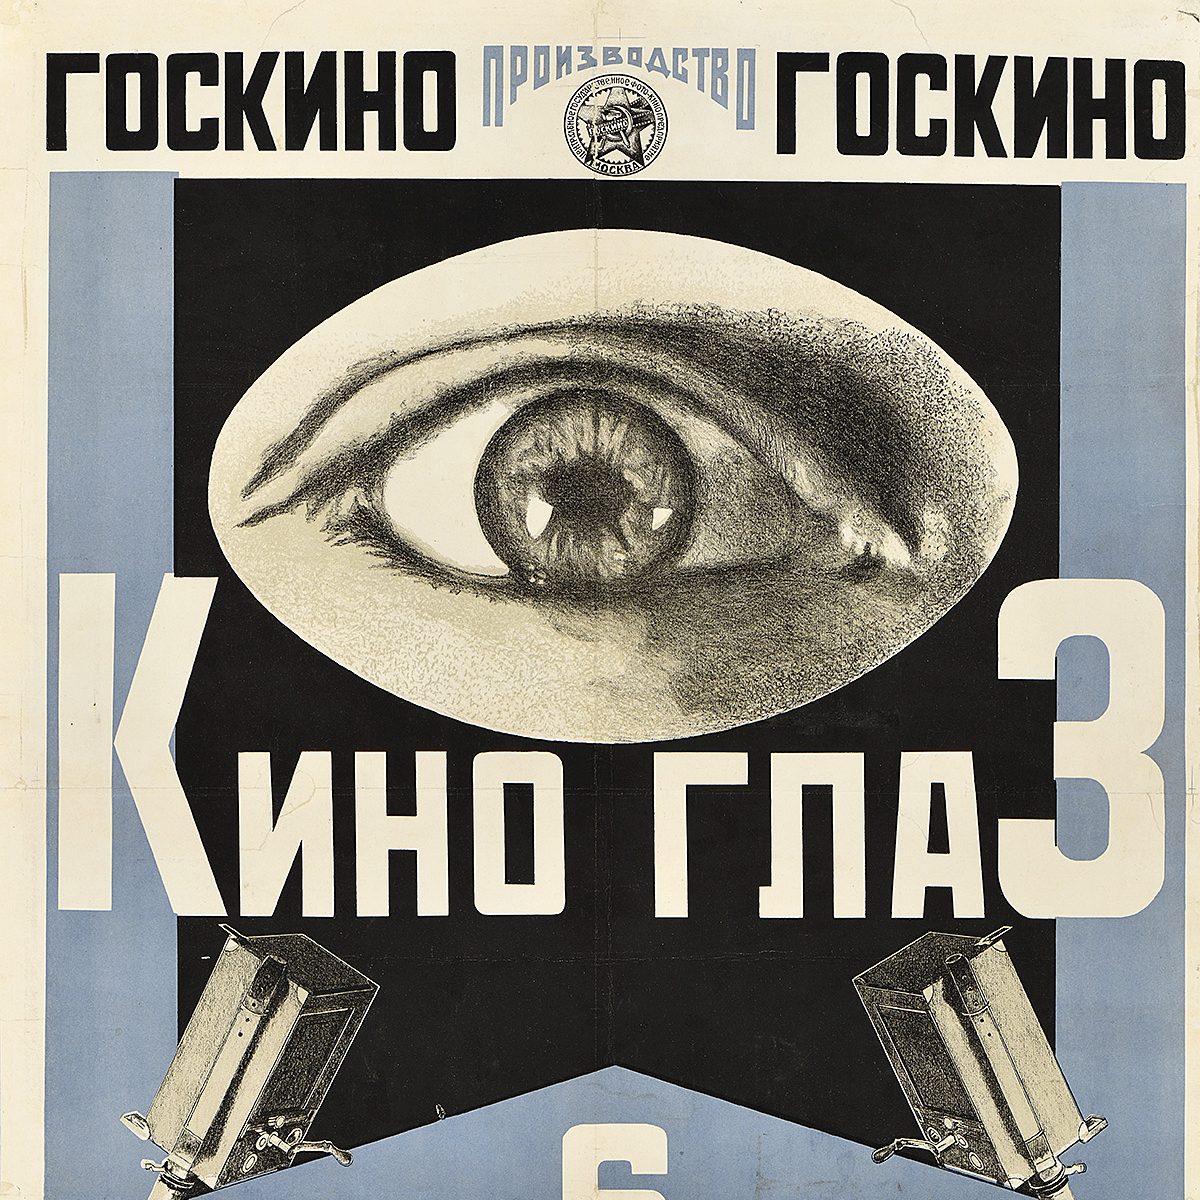 A cropped image of a poster featuring a photorealistic eye on a black and blue background with Cyrillic lettering above and below it.